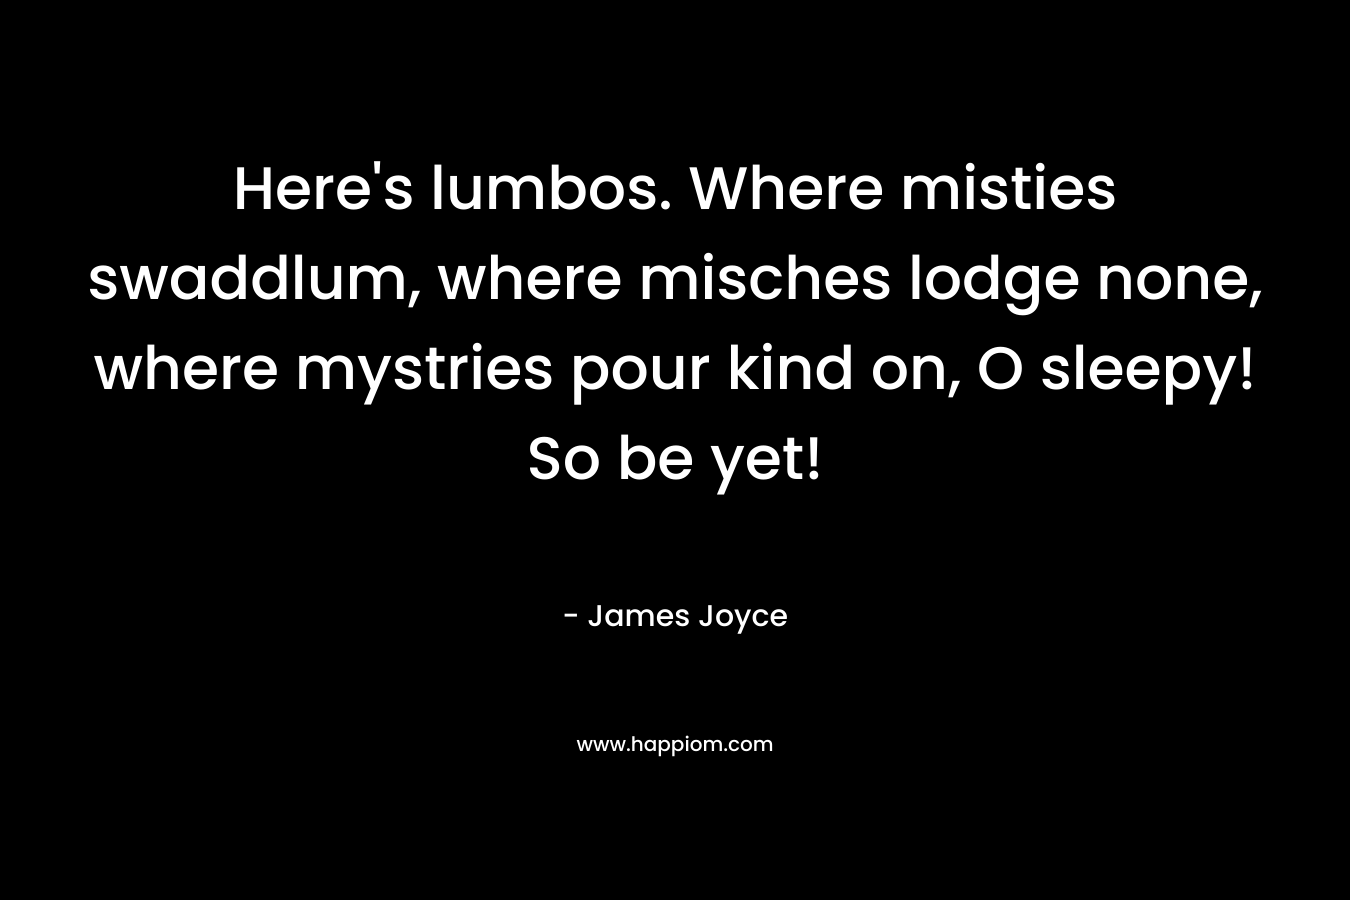 Here’s lumbos. Where misties swaddlum, where misches lodge none, where mystries pour kind on, O sleepy! So be yet! – James Joyce